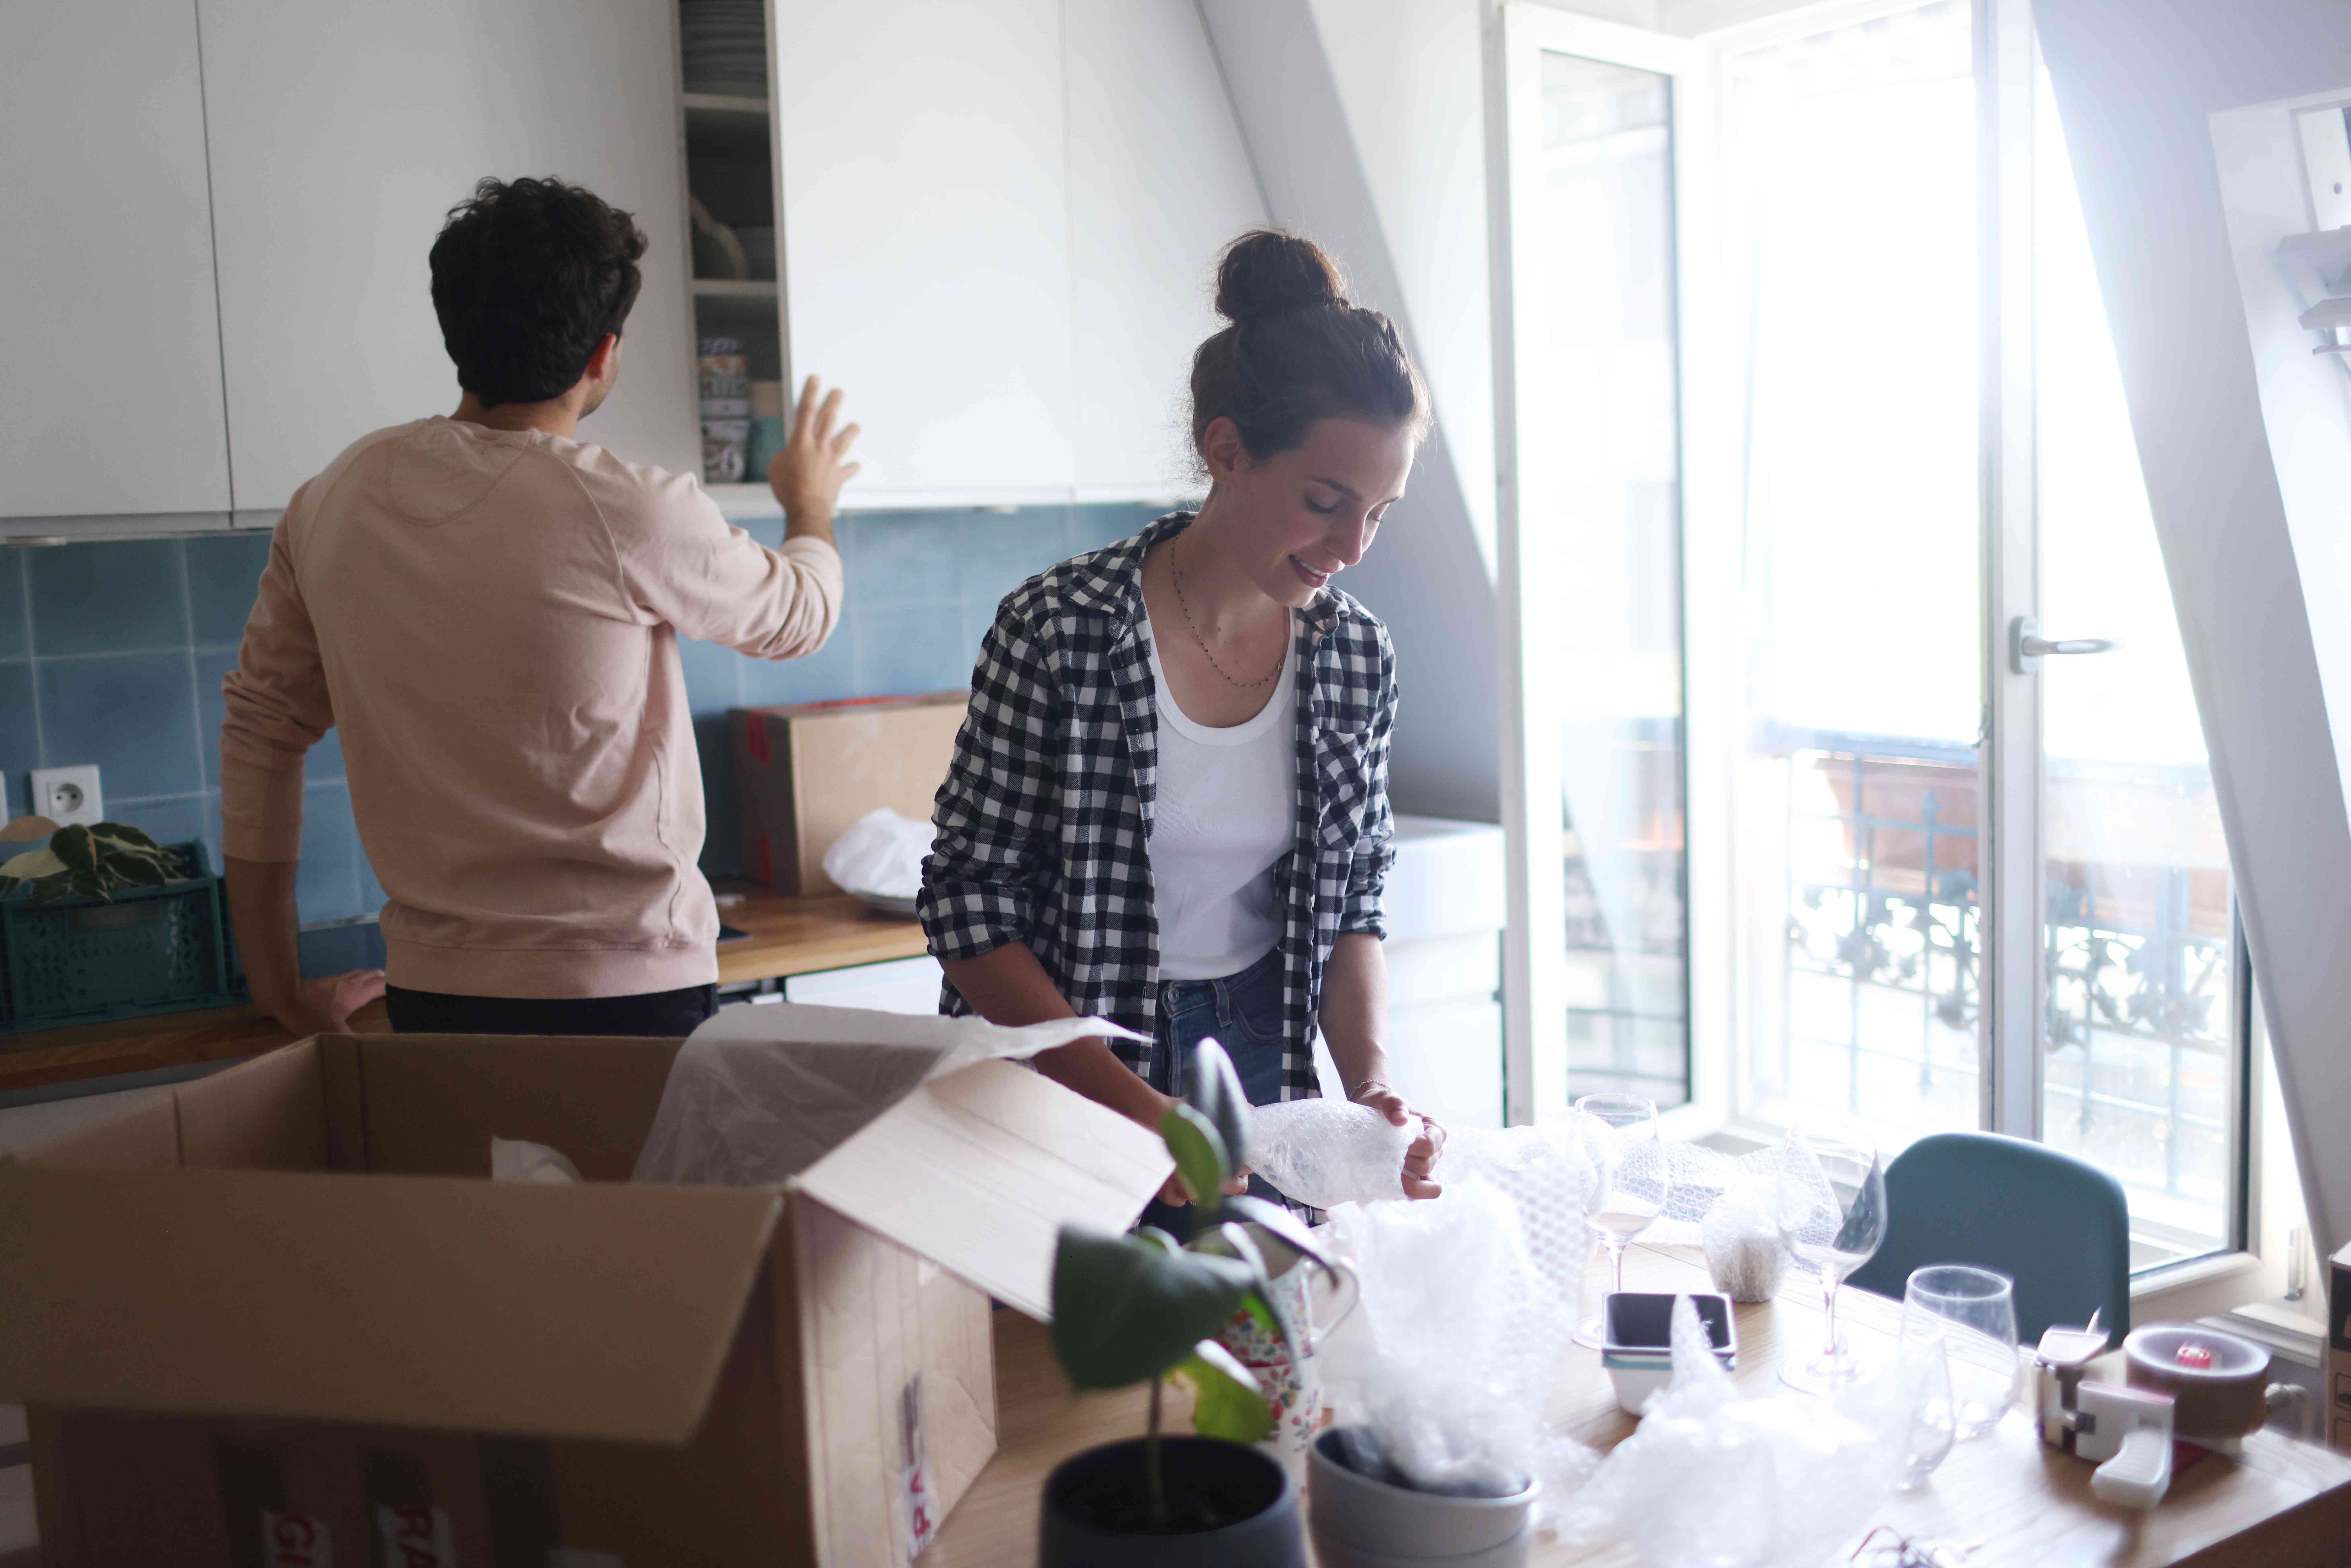 A couple unpacking boxes in a kitchen